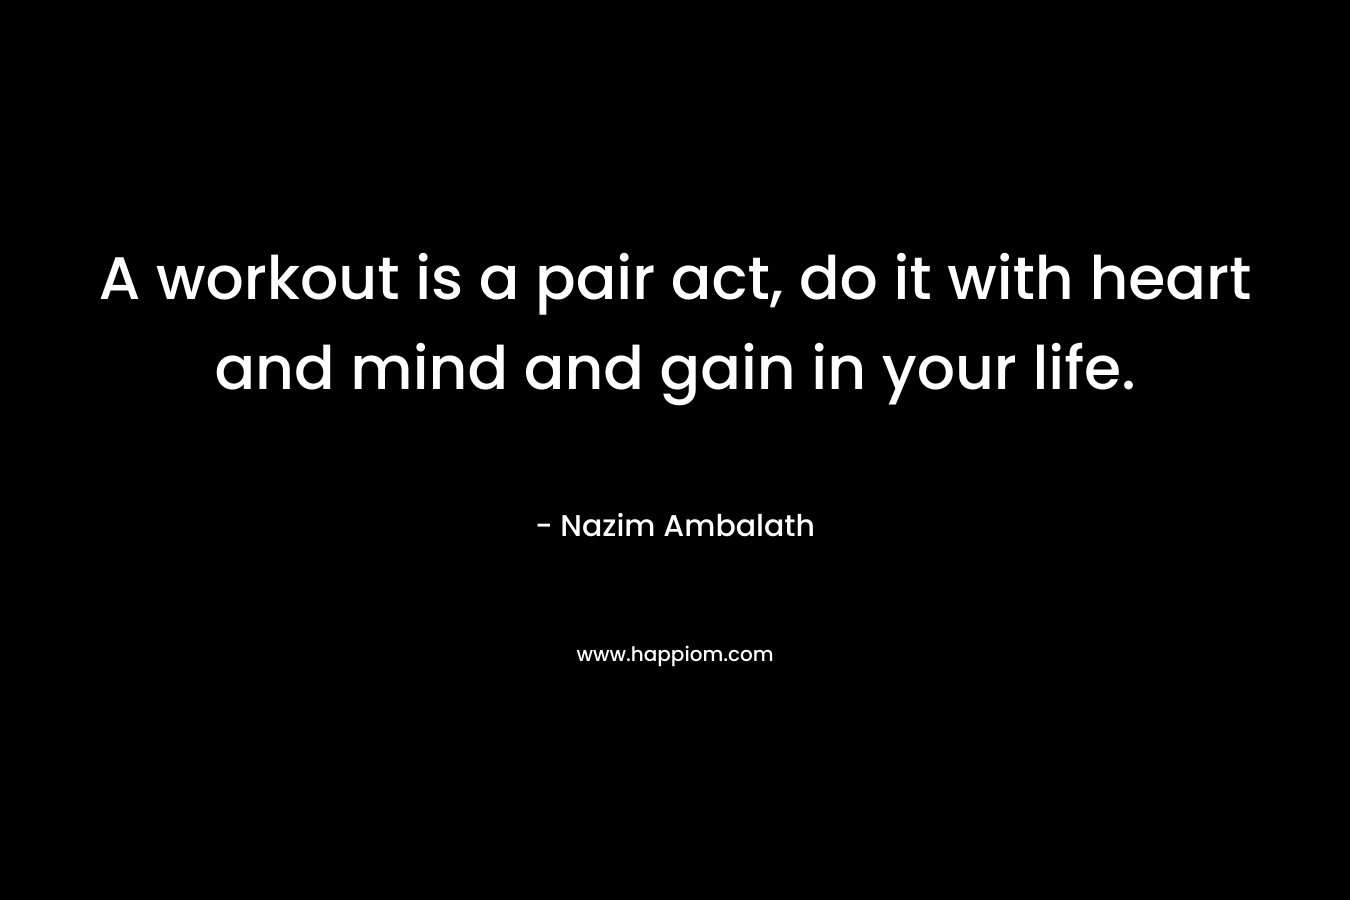 A workout is a pair act, do it with heart and mind and gain in your life.